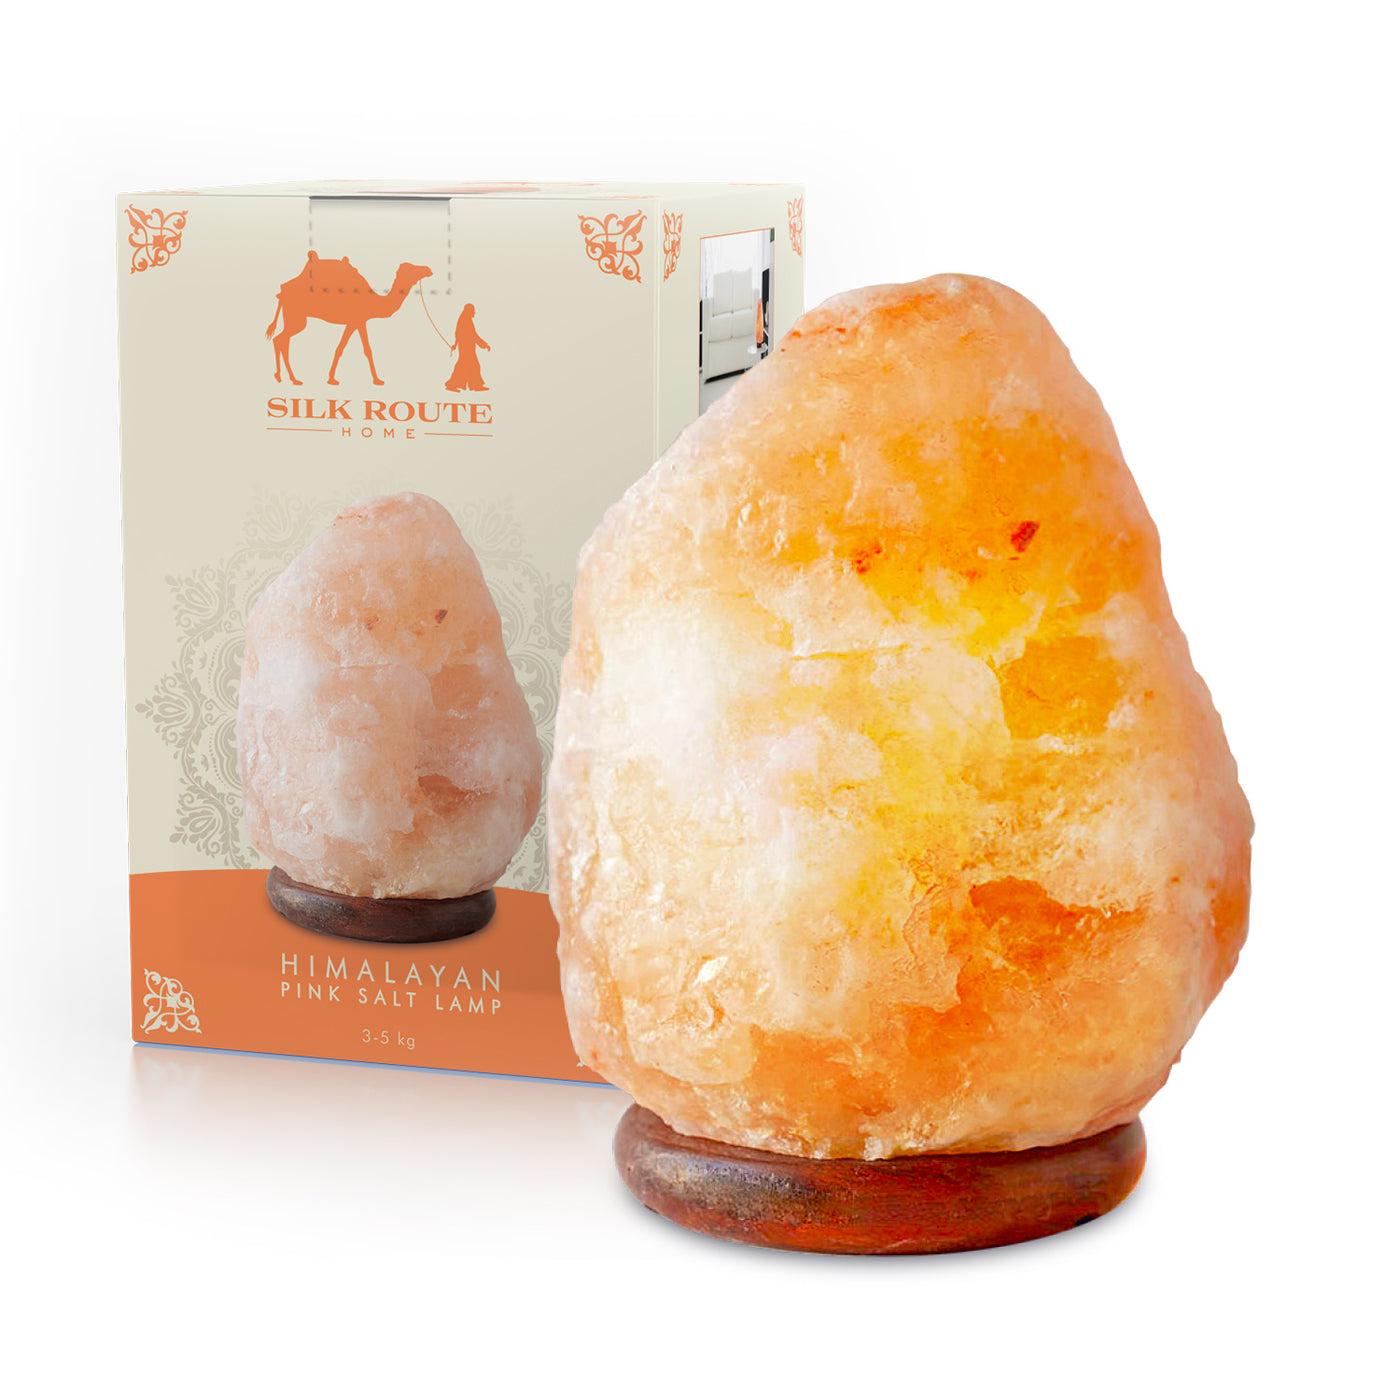 Himalayan Salt lamp with wooden base and plug in